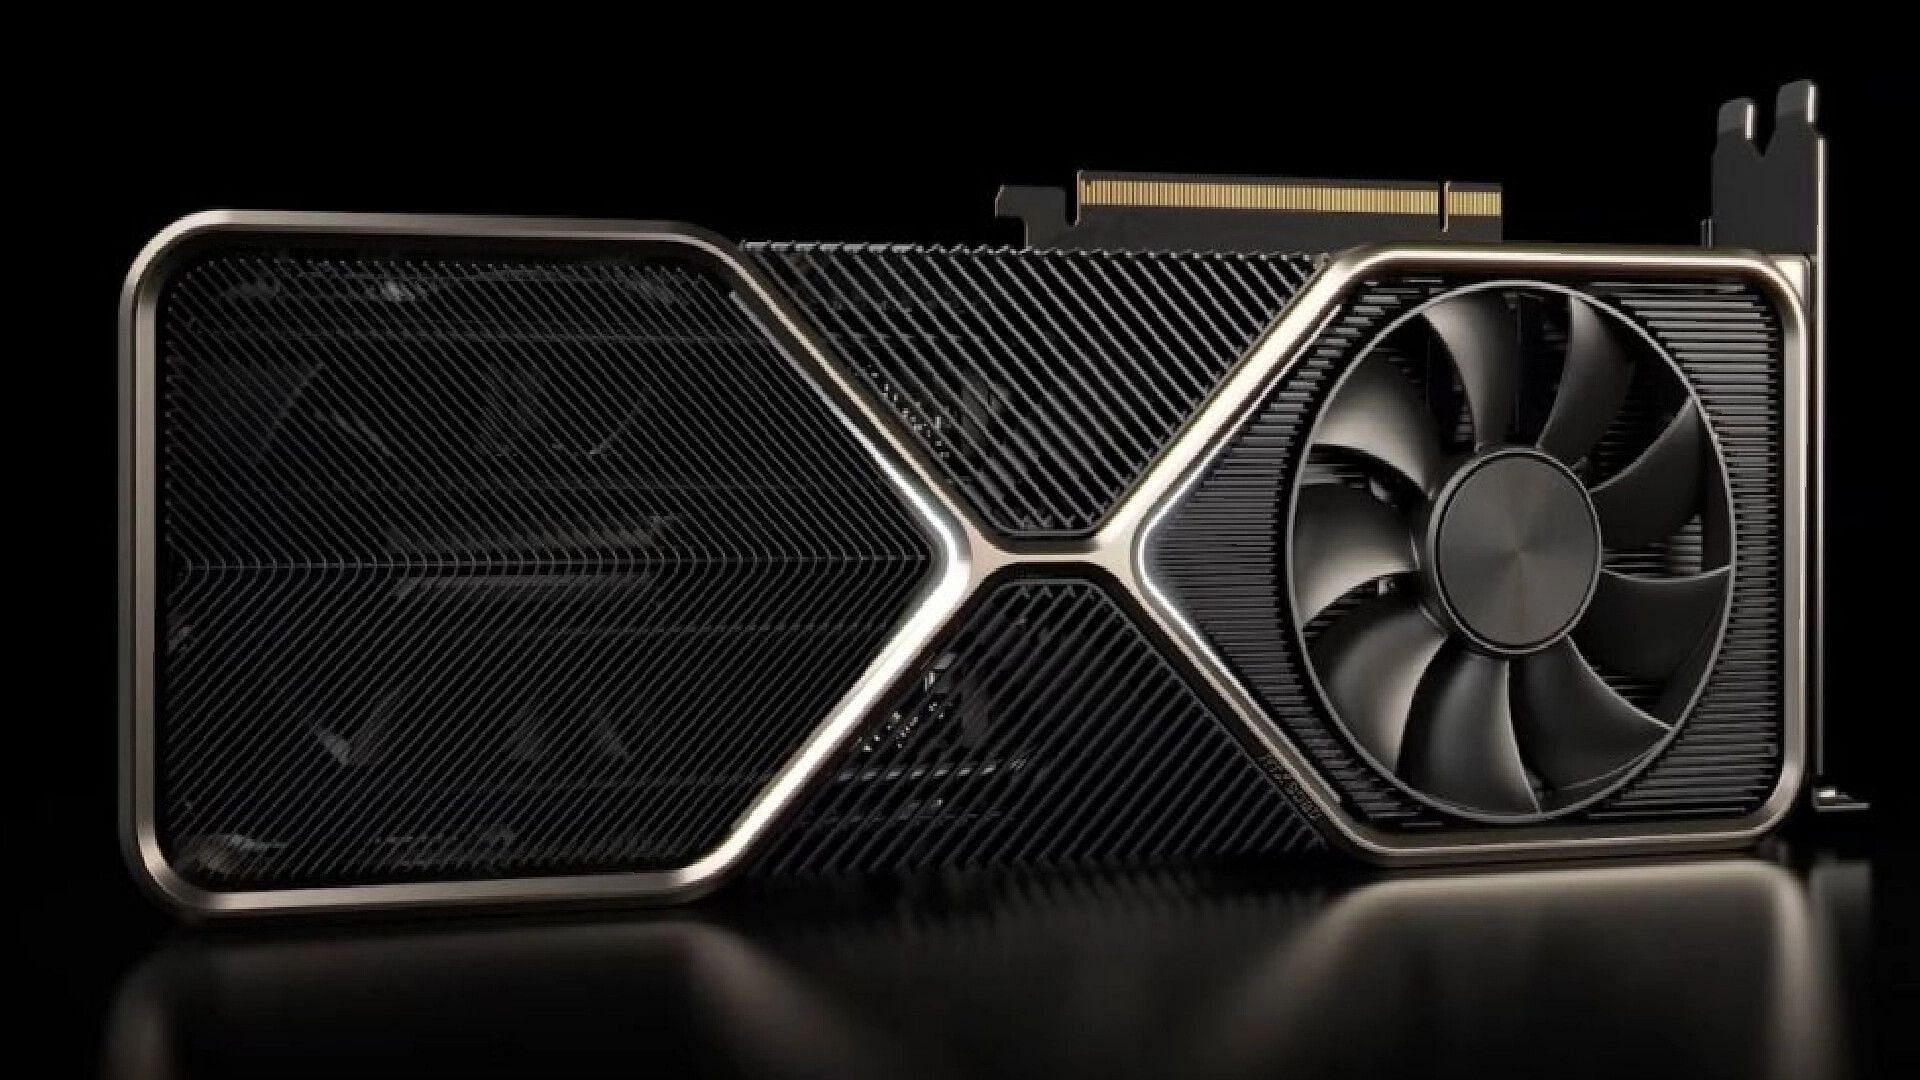 The RTX 4080 Founders